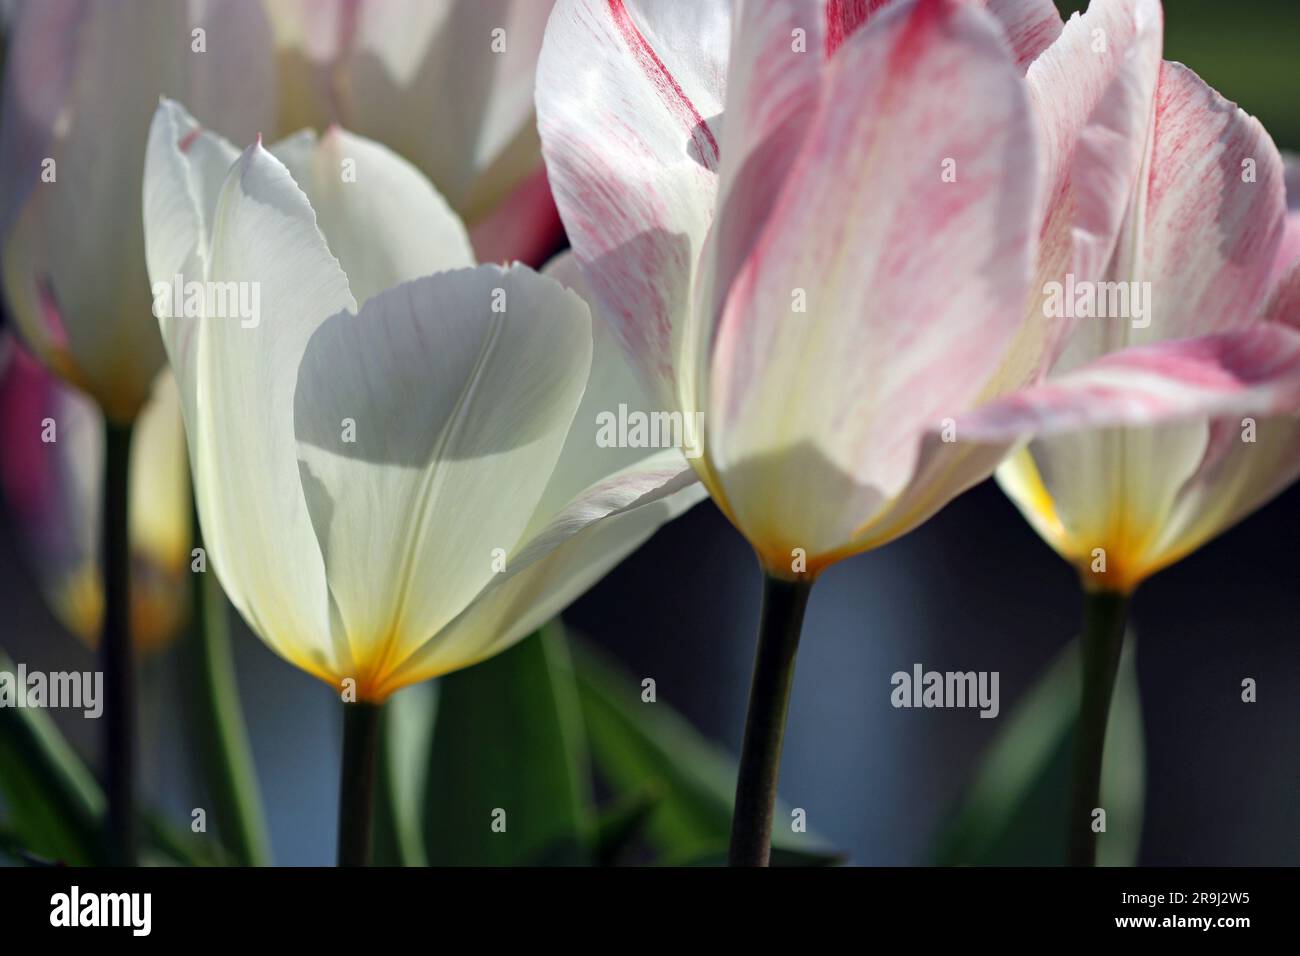 Close-up of a Tulipa Purissima flower with broad pure white petals and a creamy base. Also showing Tulipa Flaming Purissima. Bright April sunlight Stock Photo